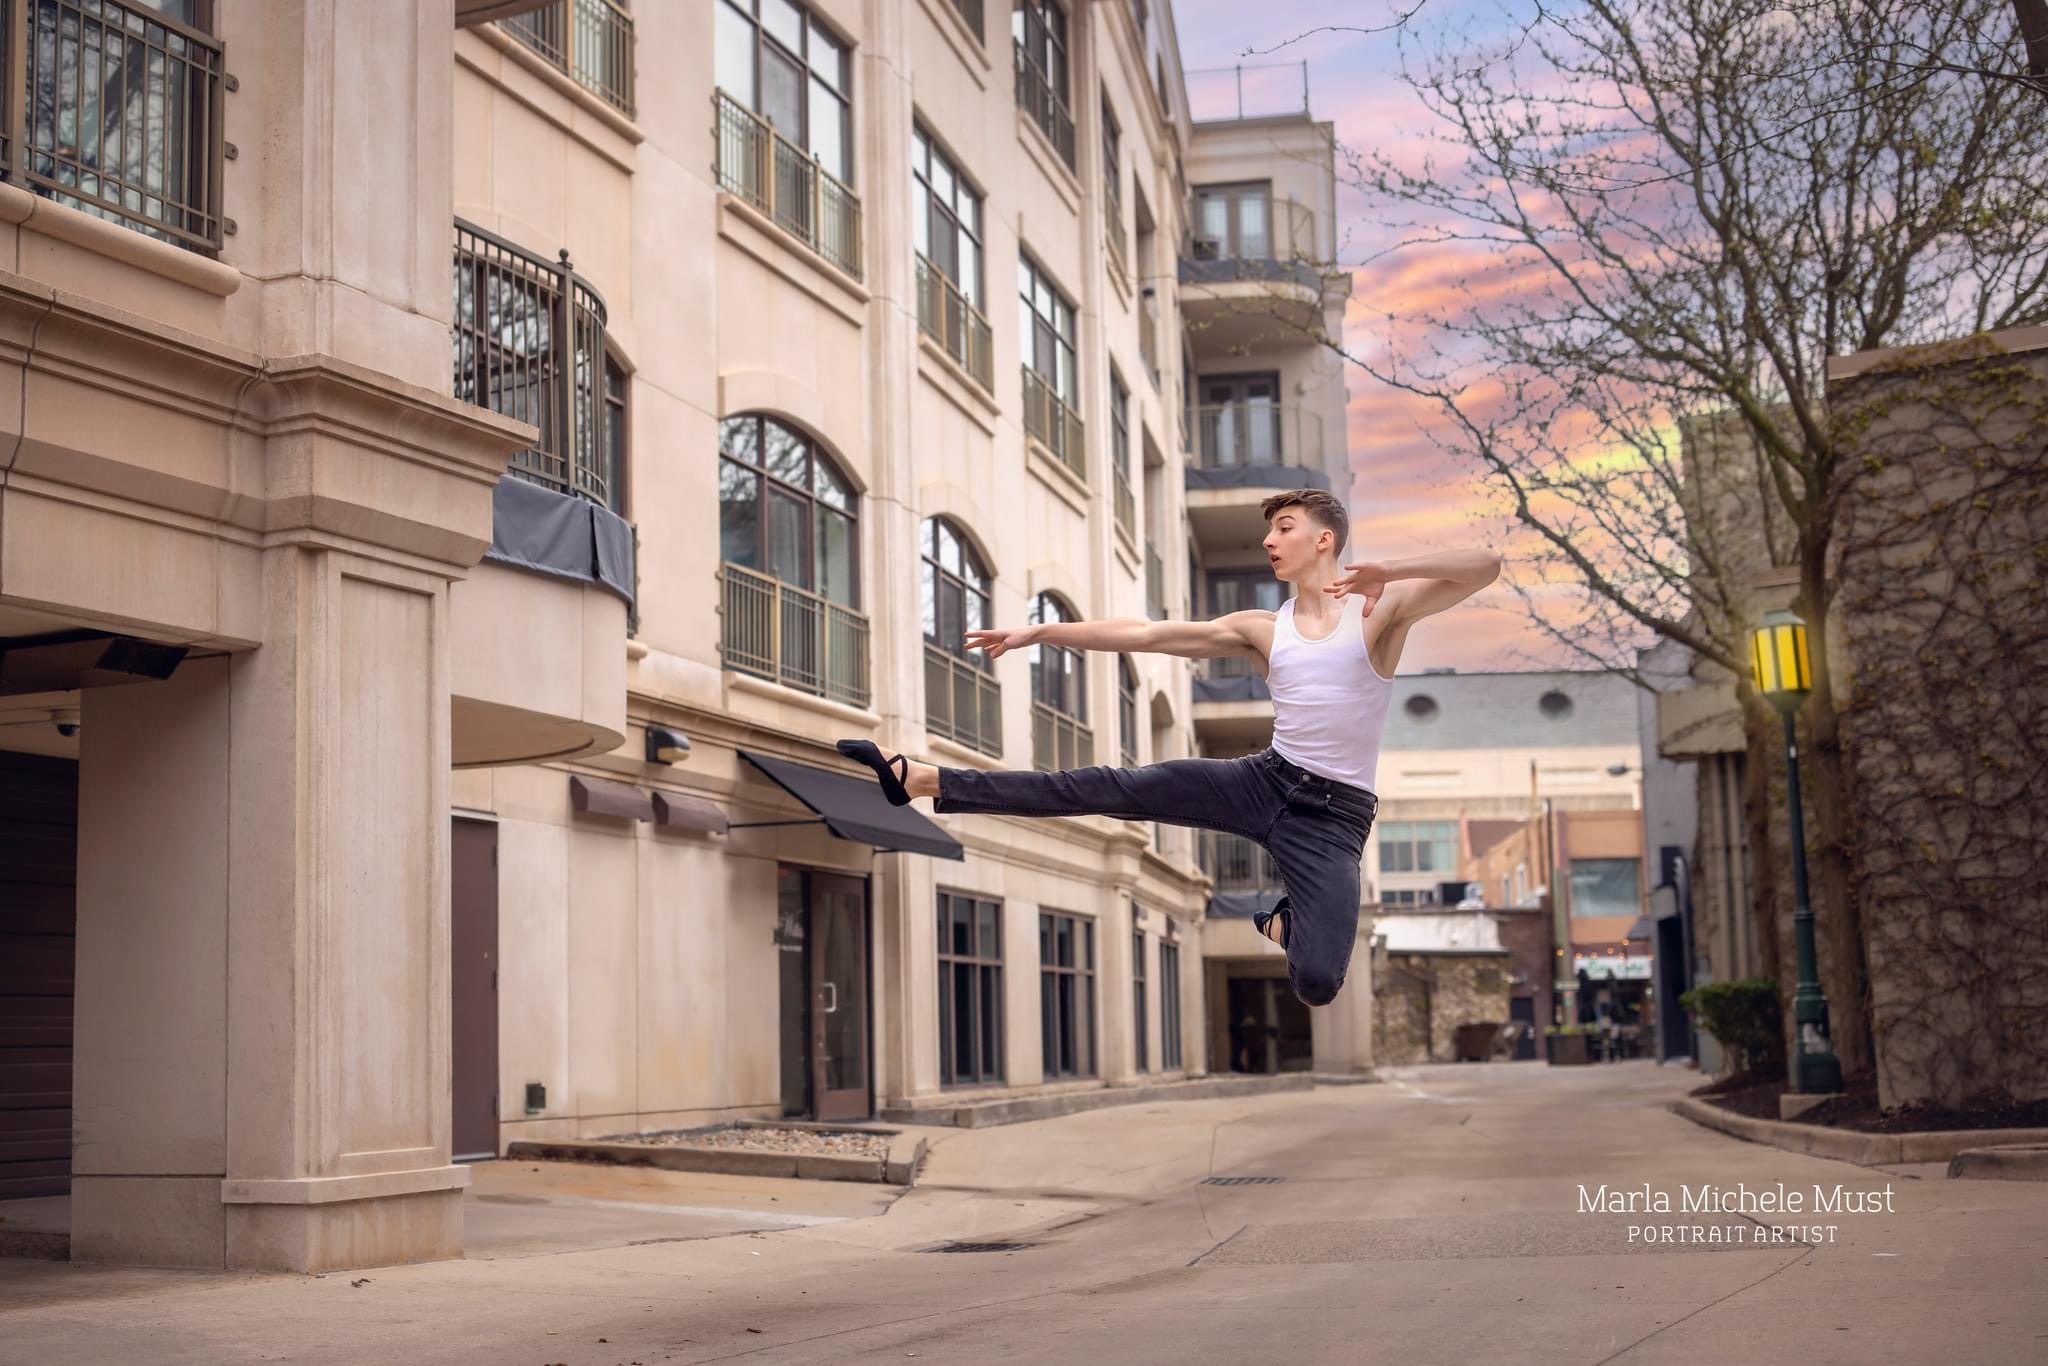 Man jumps in the air with one leg outstretched in downtown Detroit during a dance photoshoot, taken by a Michigan dance photographer.